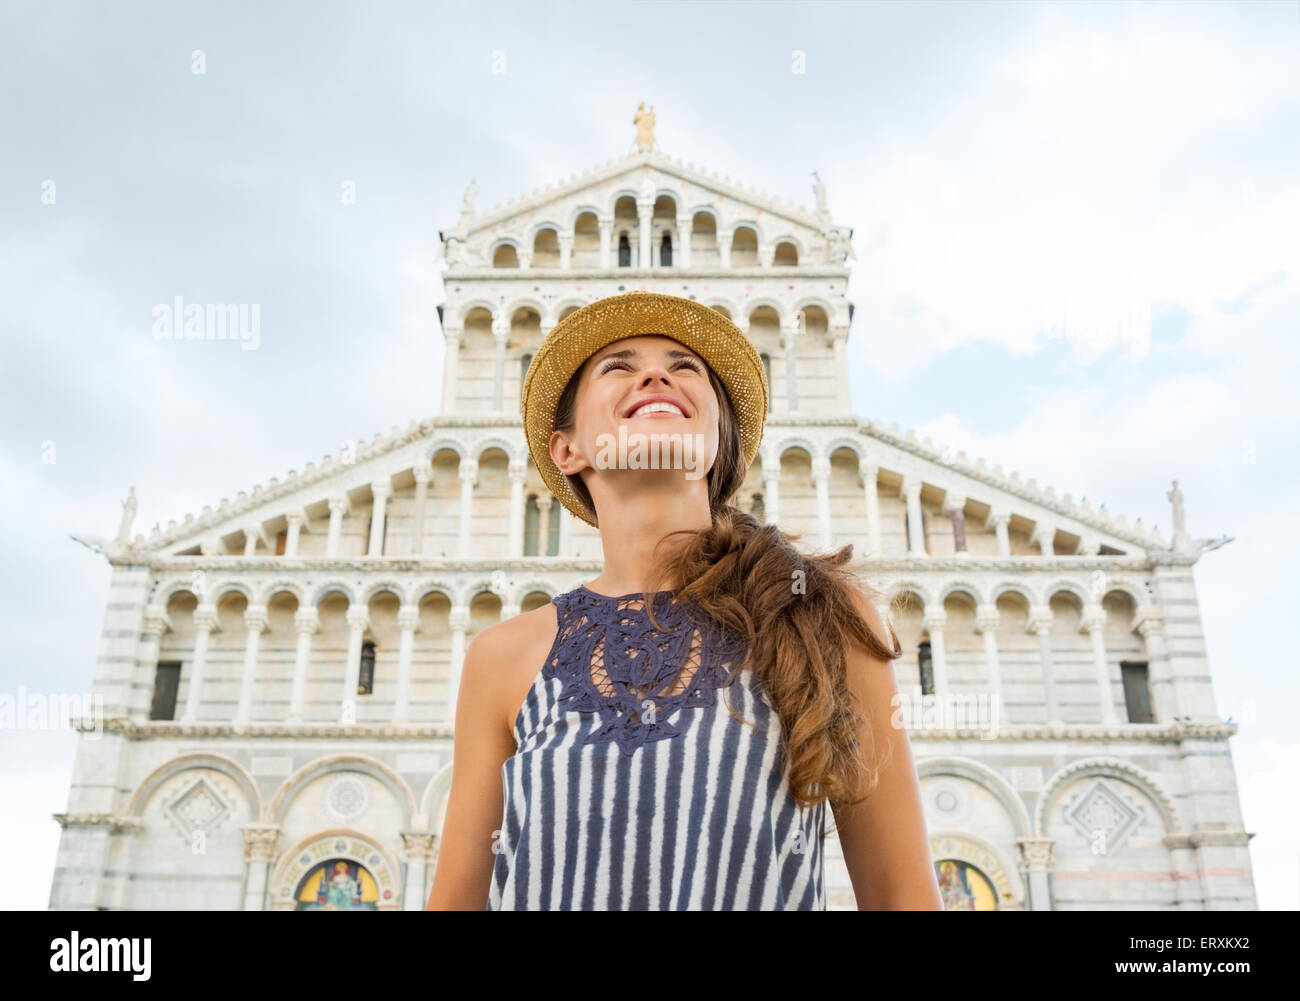 Looking up at the summer sky, a happy woman tourist is smiling as she enjoys the sights in Pisa. Stock Photo